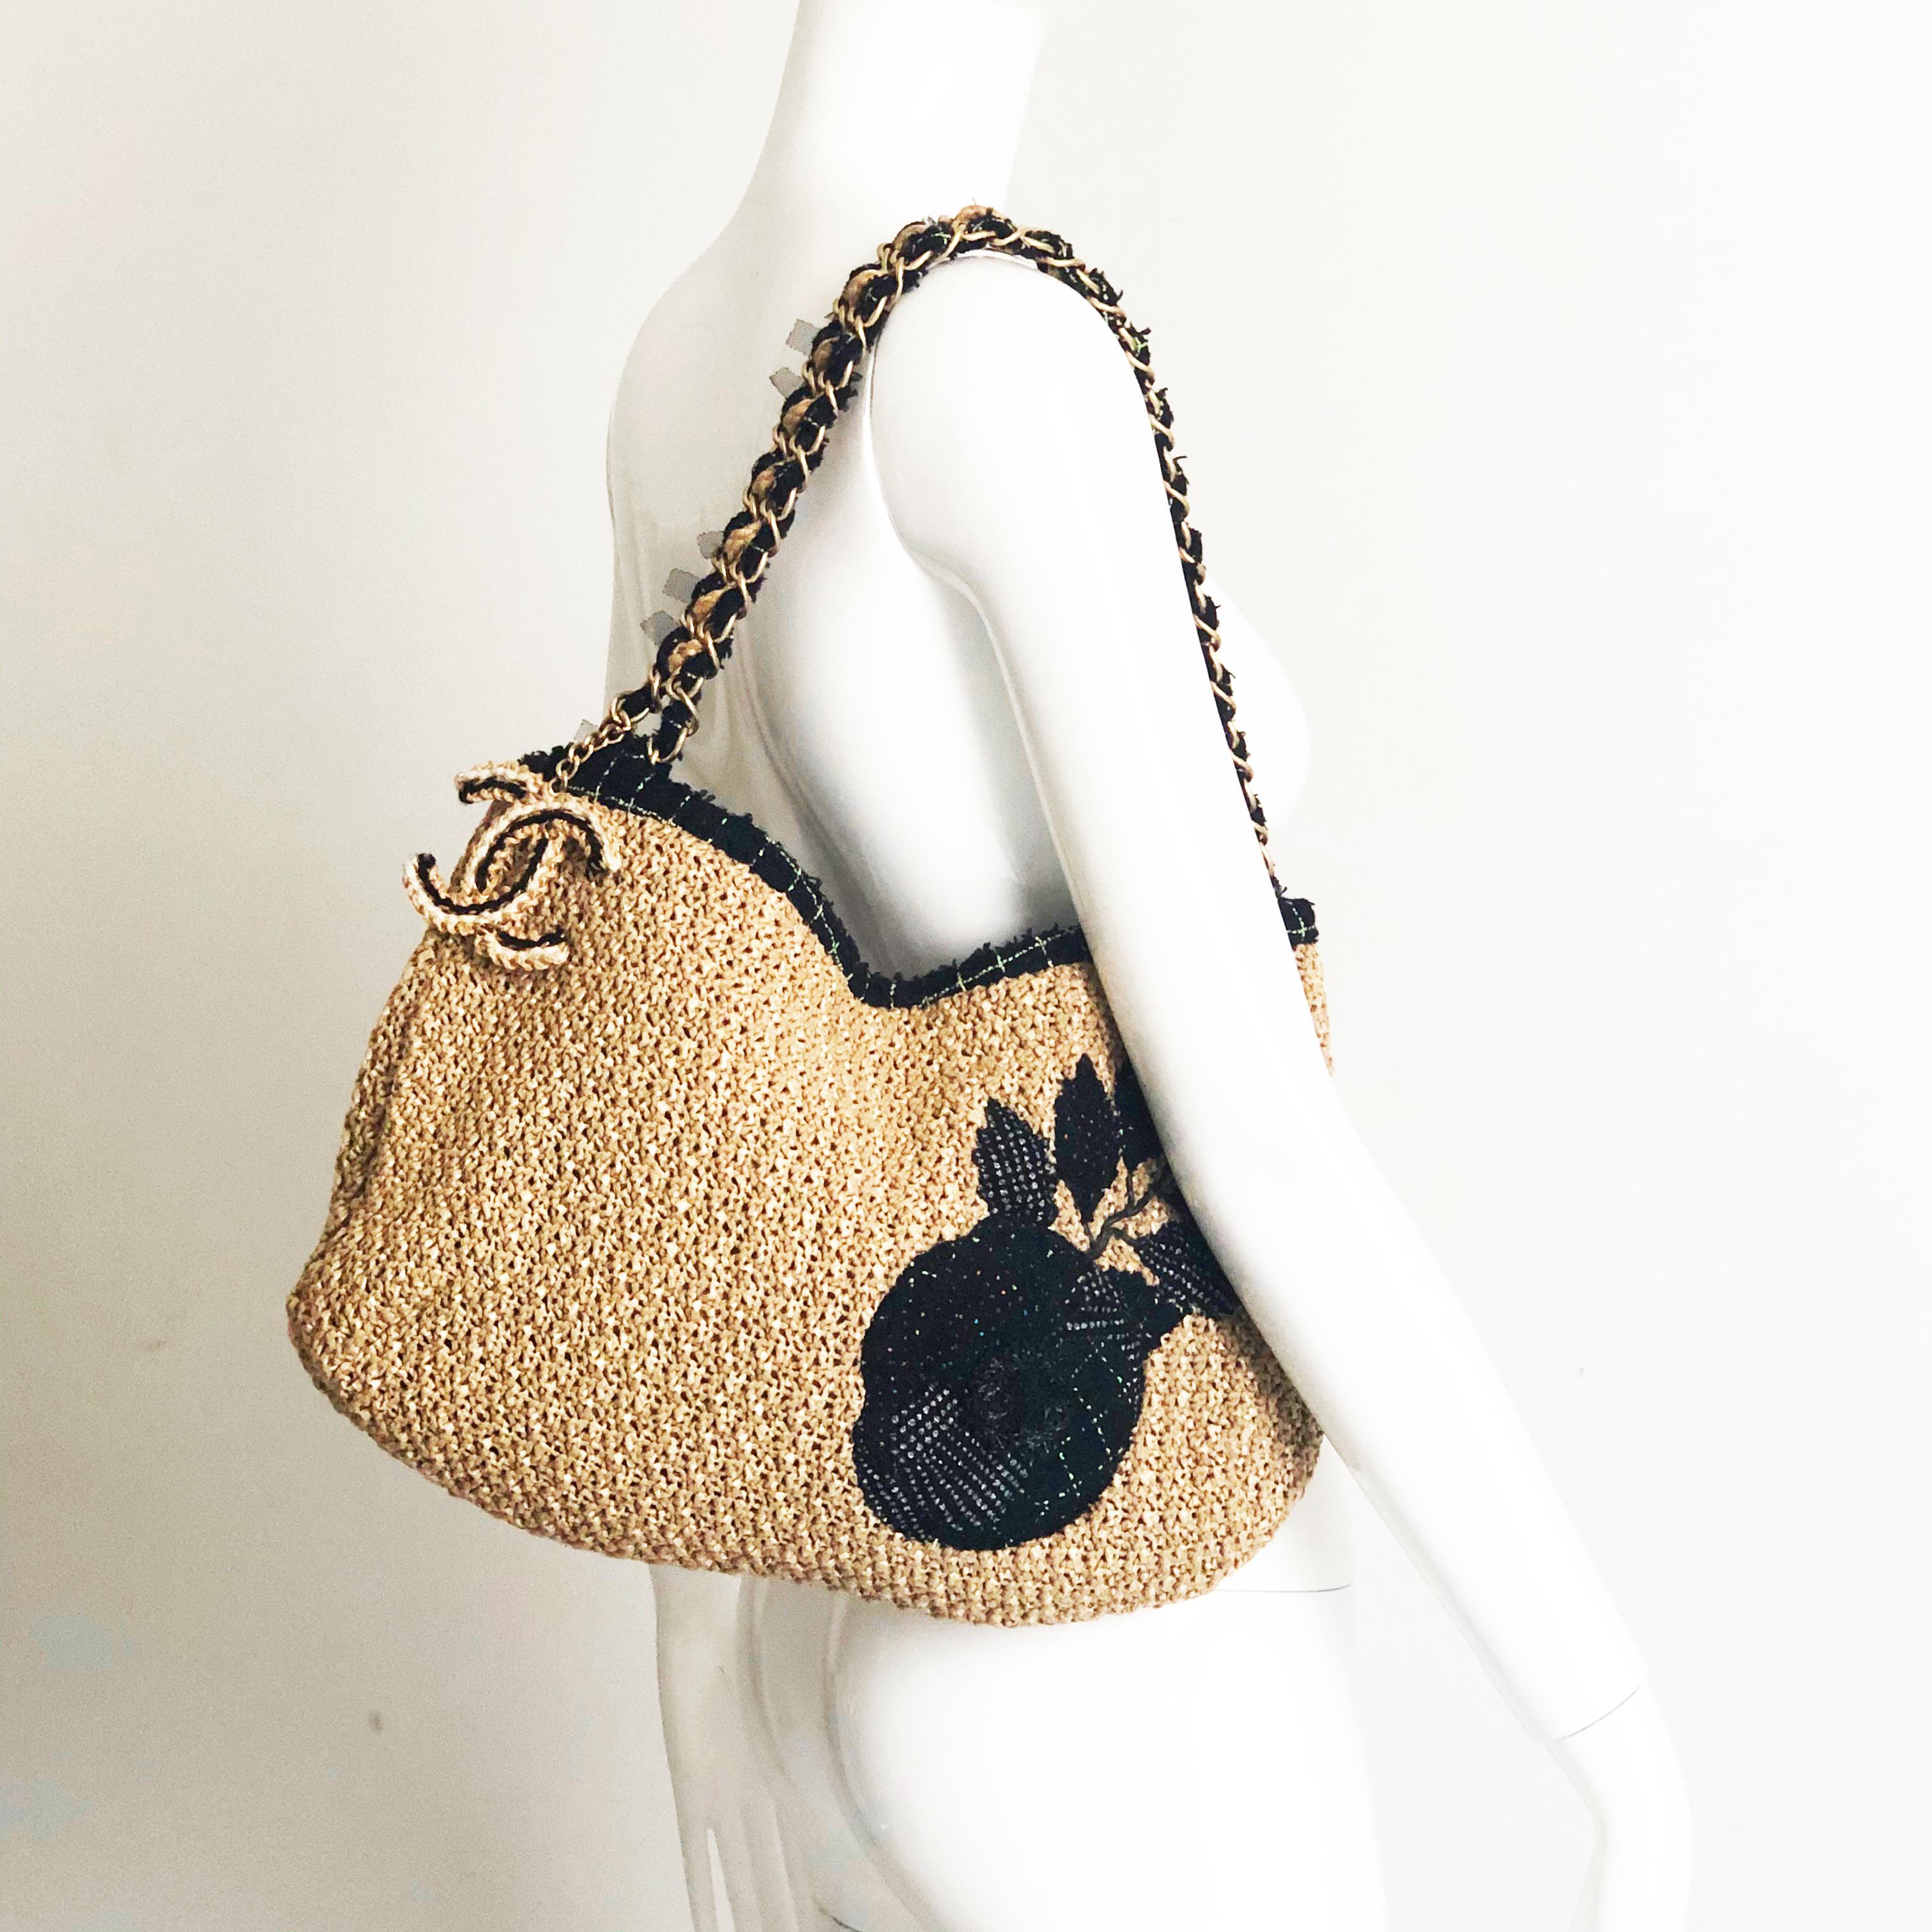 Authentic, preowned Chanel Coco Country Camellia Woven Straw shoulder bag, circa 2010. Woven straw trimmed in boucle wool w/gold metal hardware & attached CC logo charm. Lined in fabric w/1 zip pocket, 1 open split pocket. Fastens w/magnetic